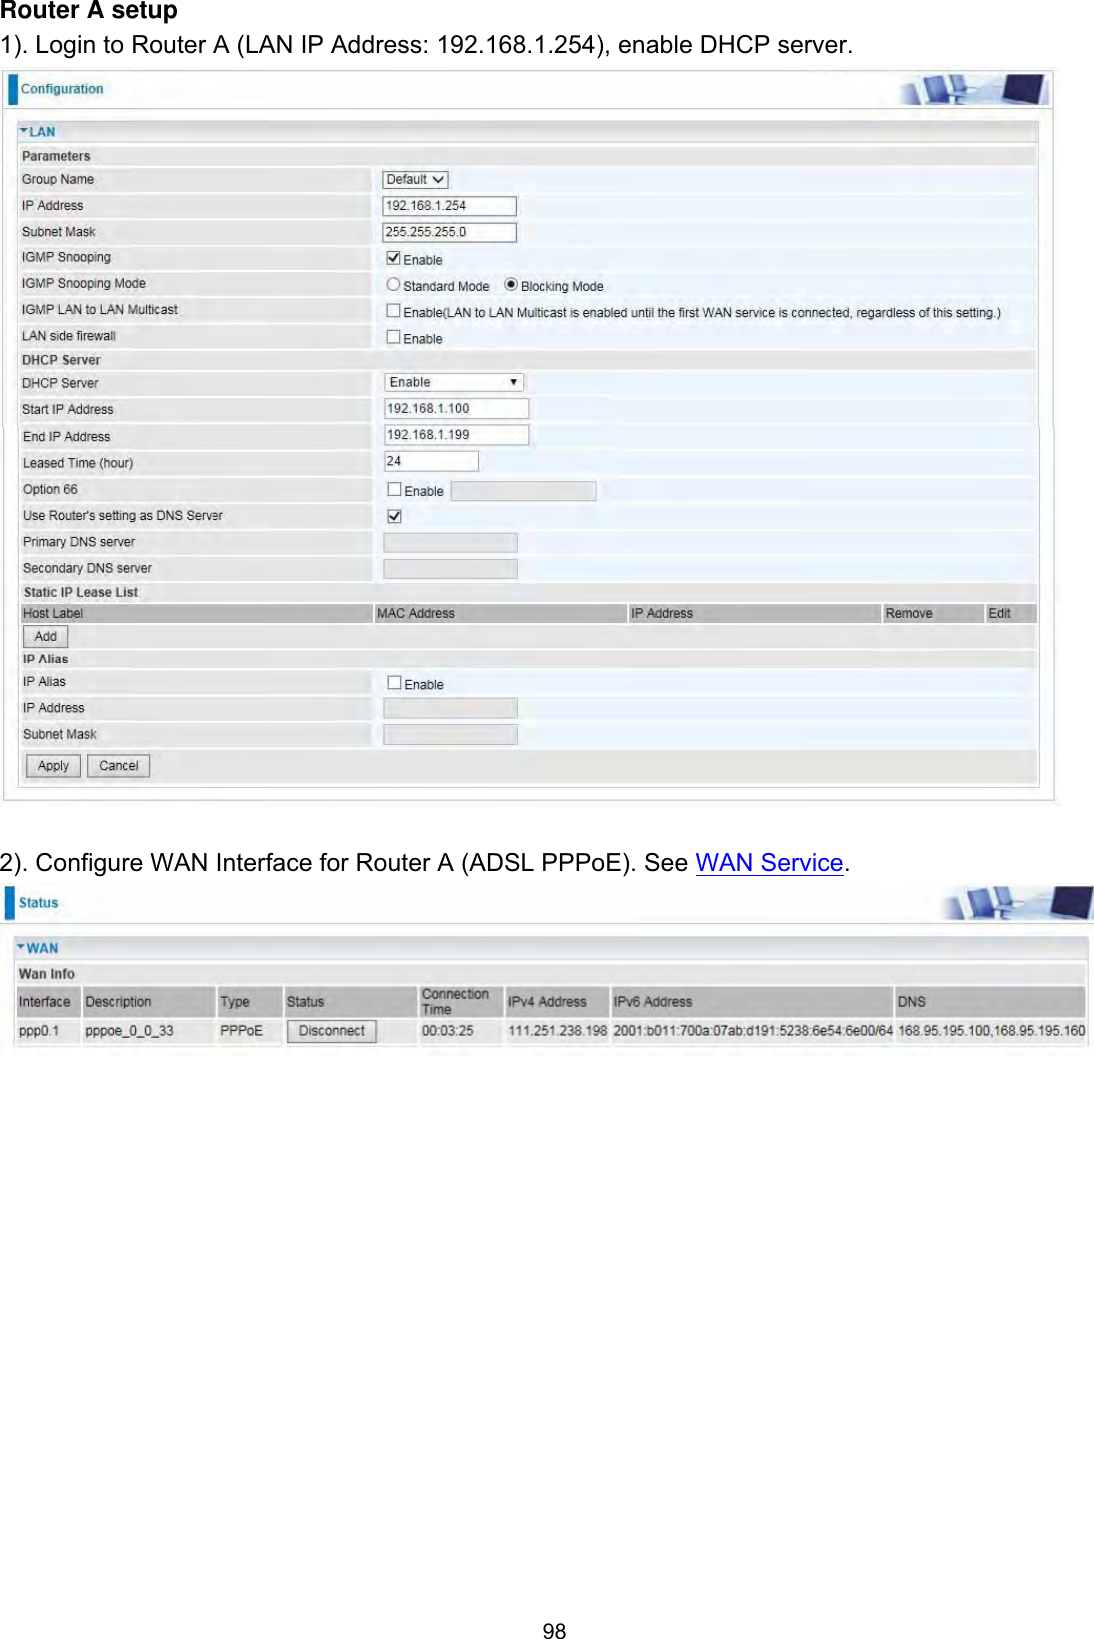 98Router A setup 1). Login to Router A (LAN IP Address: 192.168.1.254), enable DHCP server.2). Configure WAN Interface for Router A (ADSL PPPoE). See WAN Service.